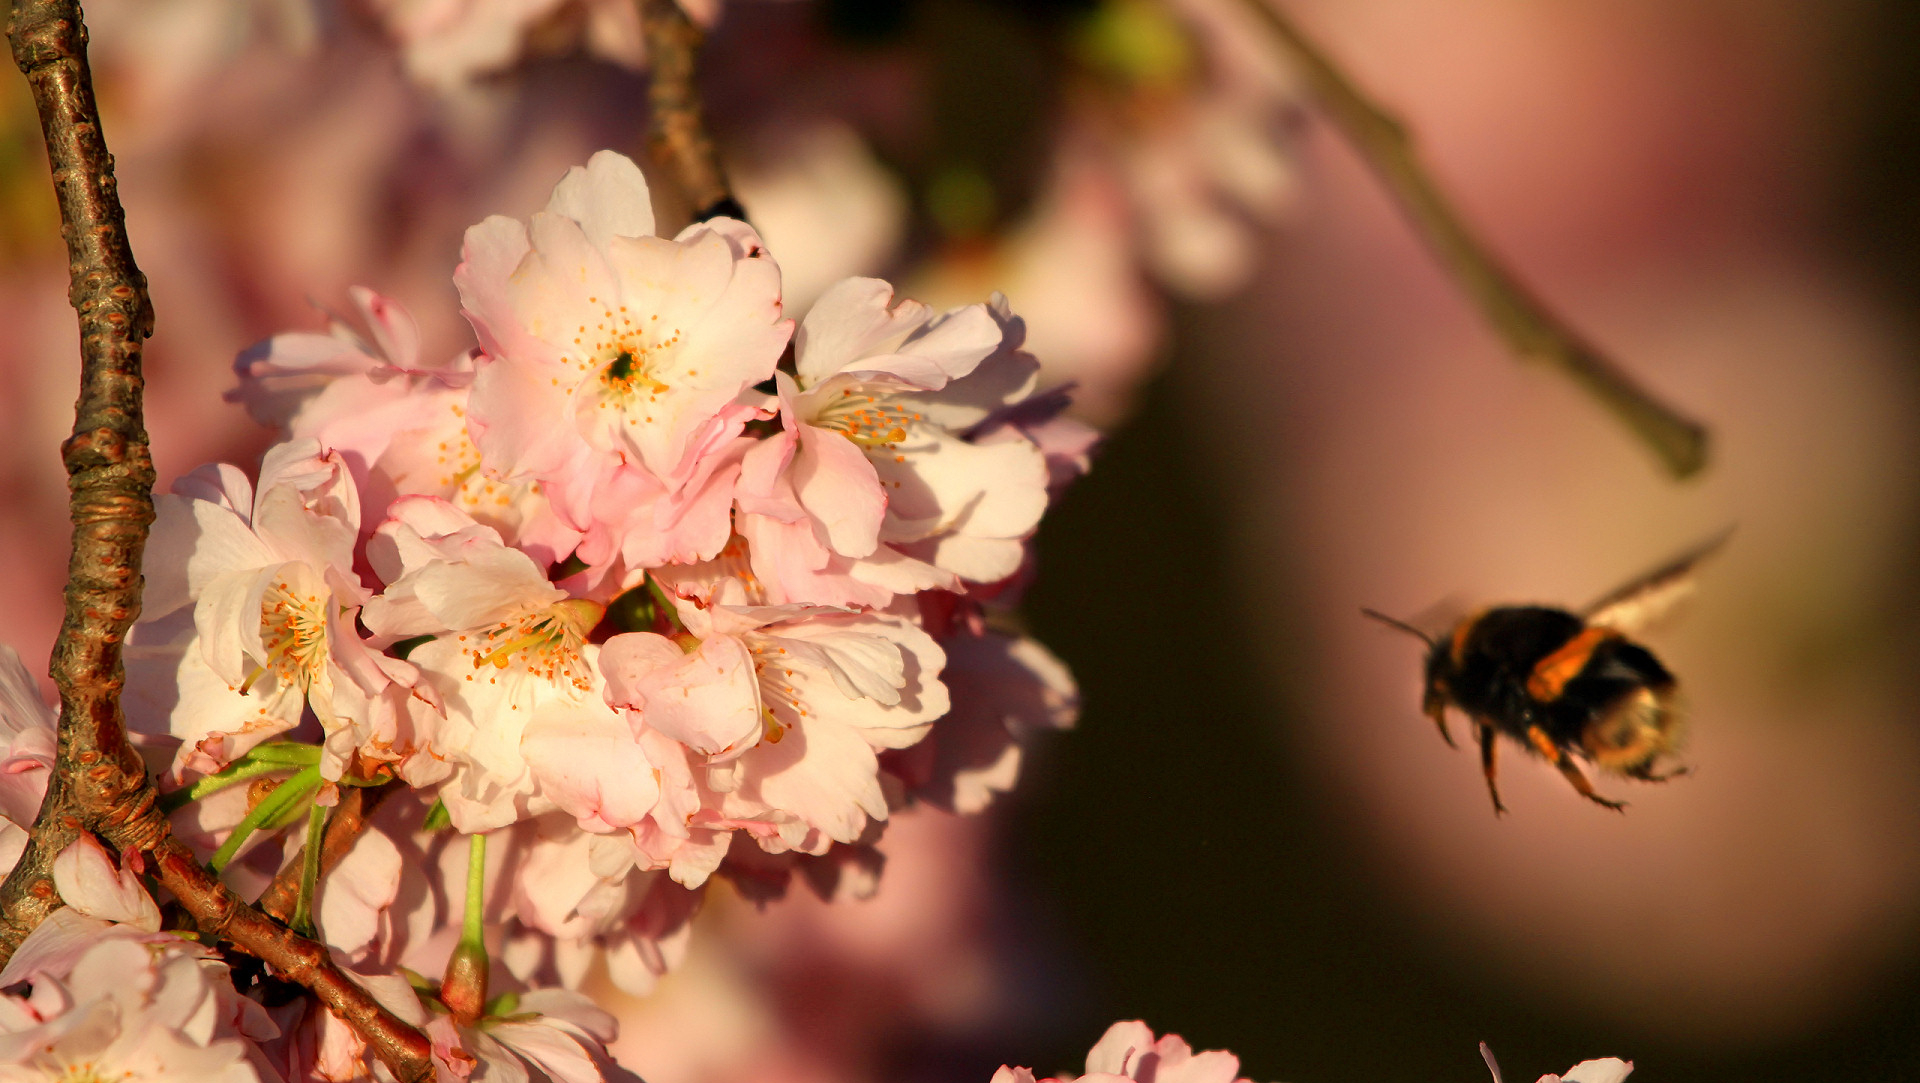 Windows Backgrounds earth, flower, bee, blossom, flowers